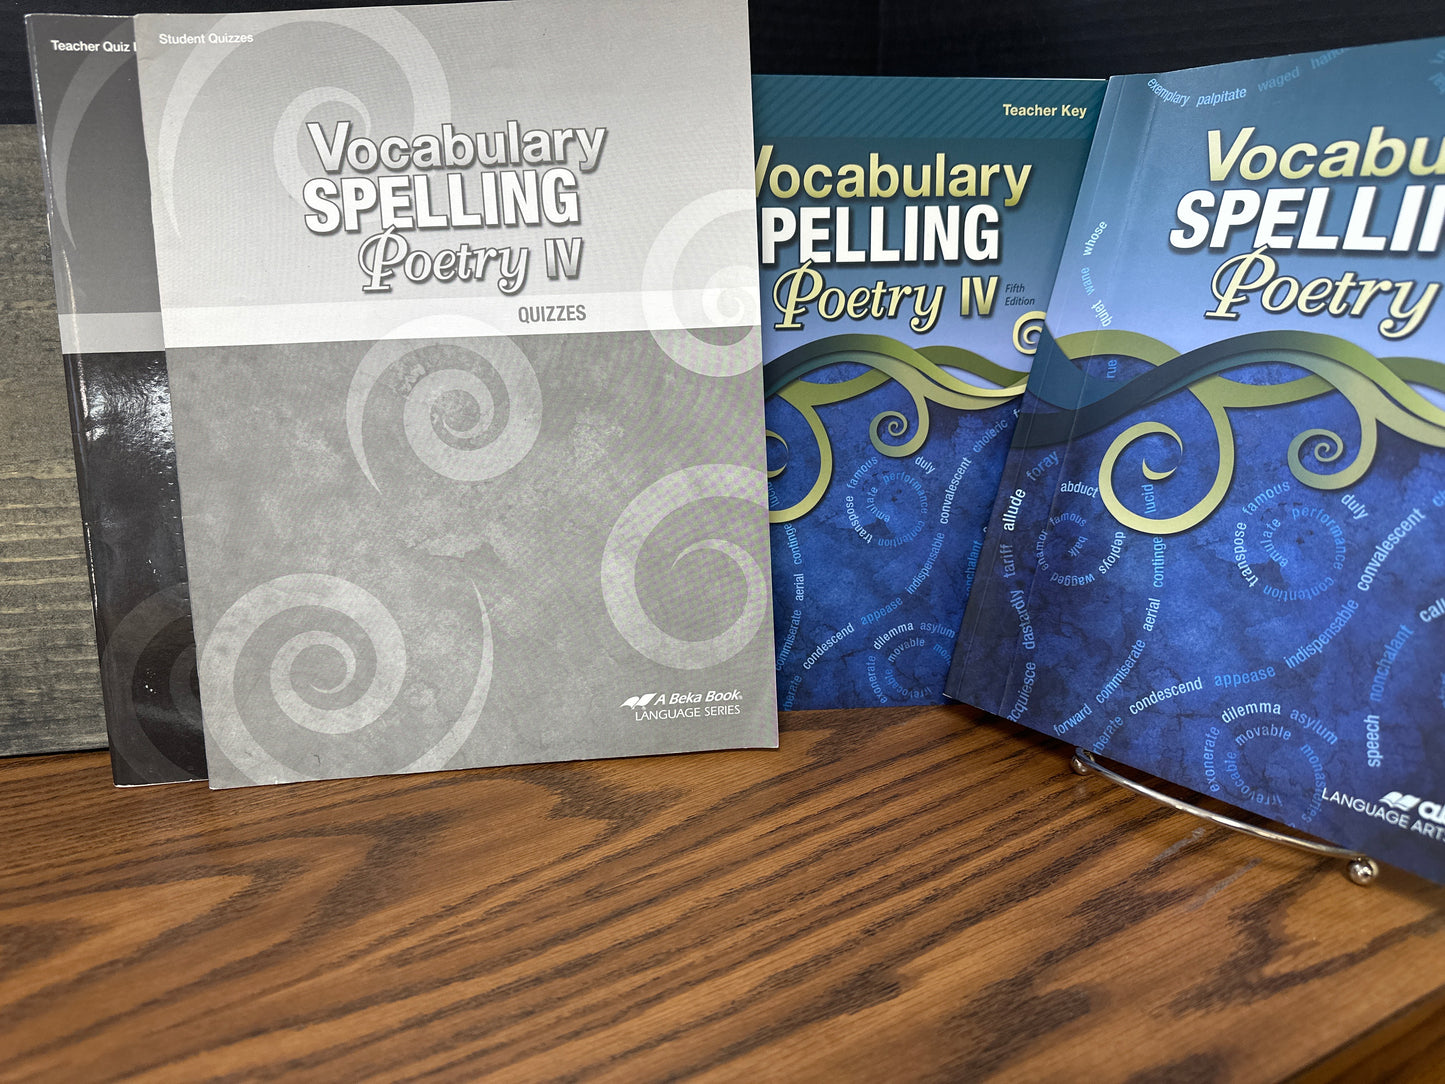 Vocabulary Spelling Poetry IV fifth ed complete set